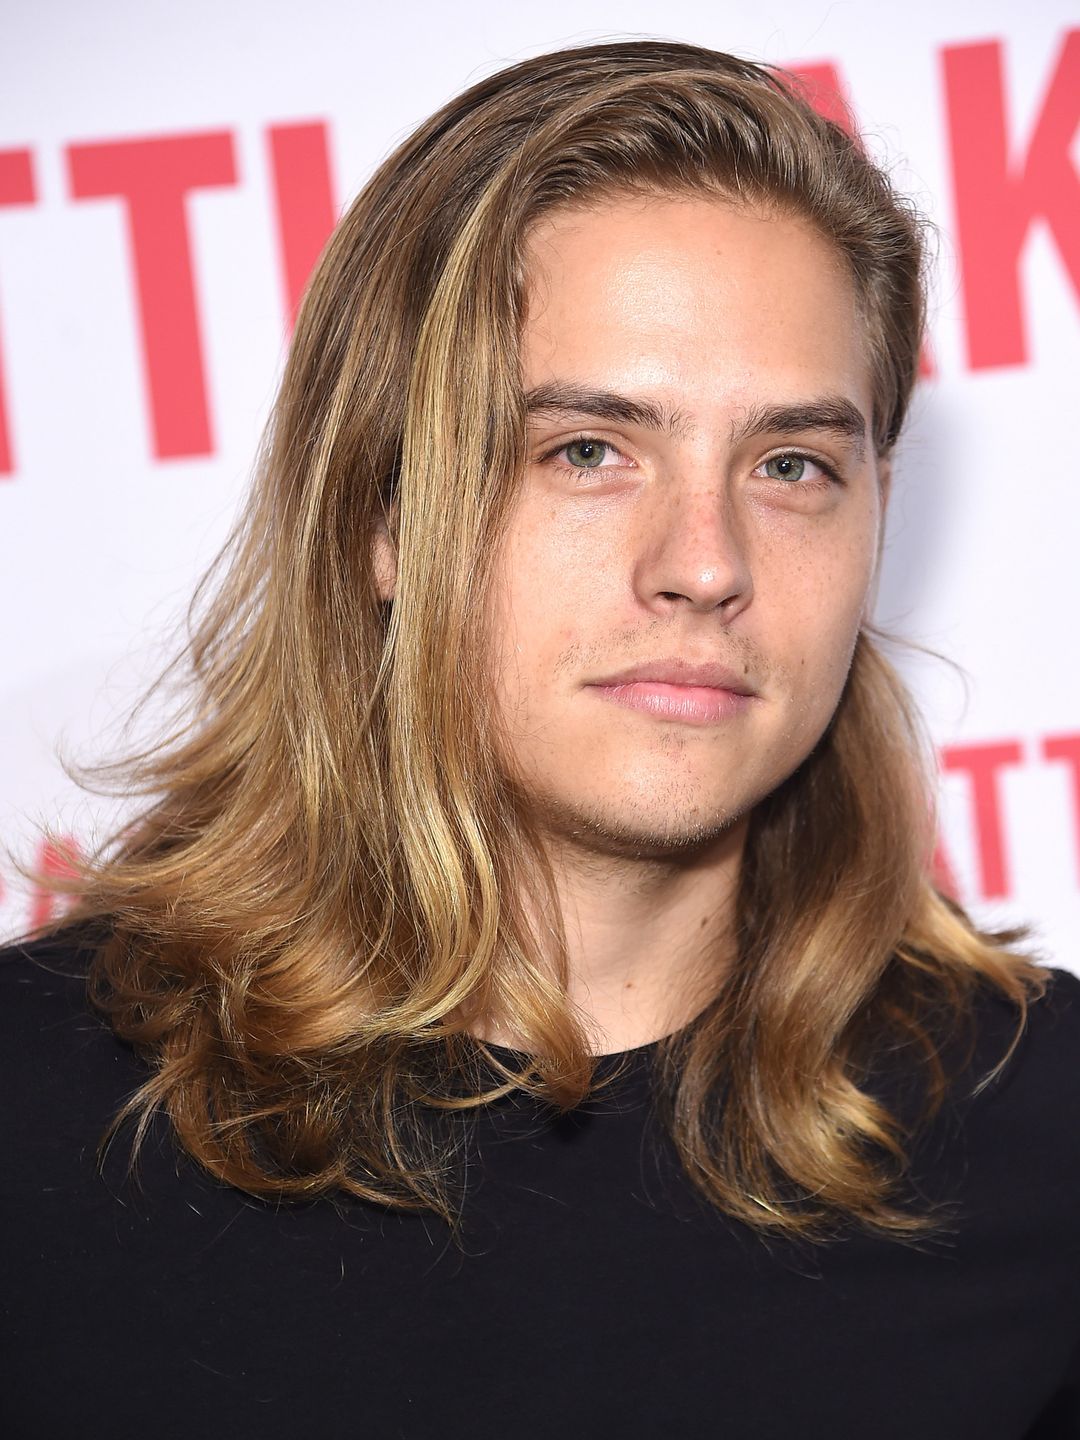 Dylan Sprouse way to fame